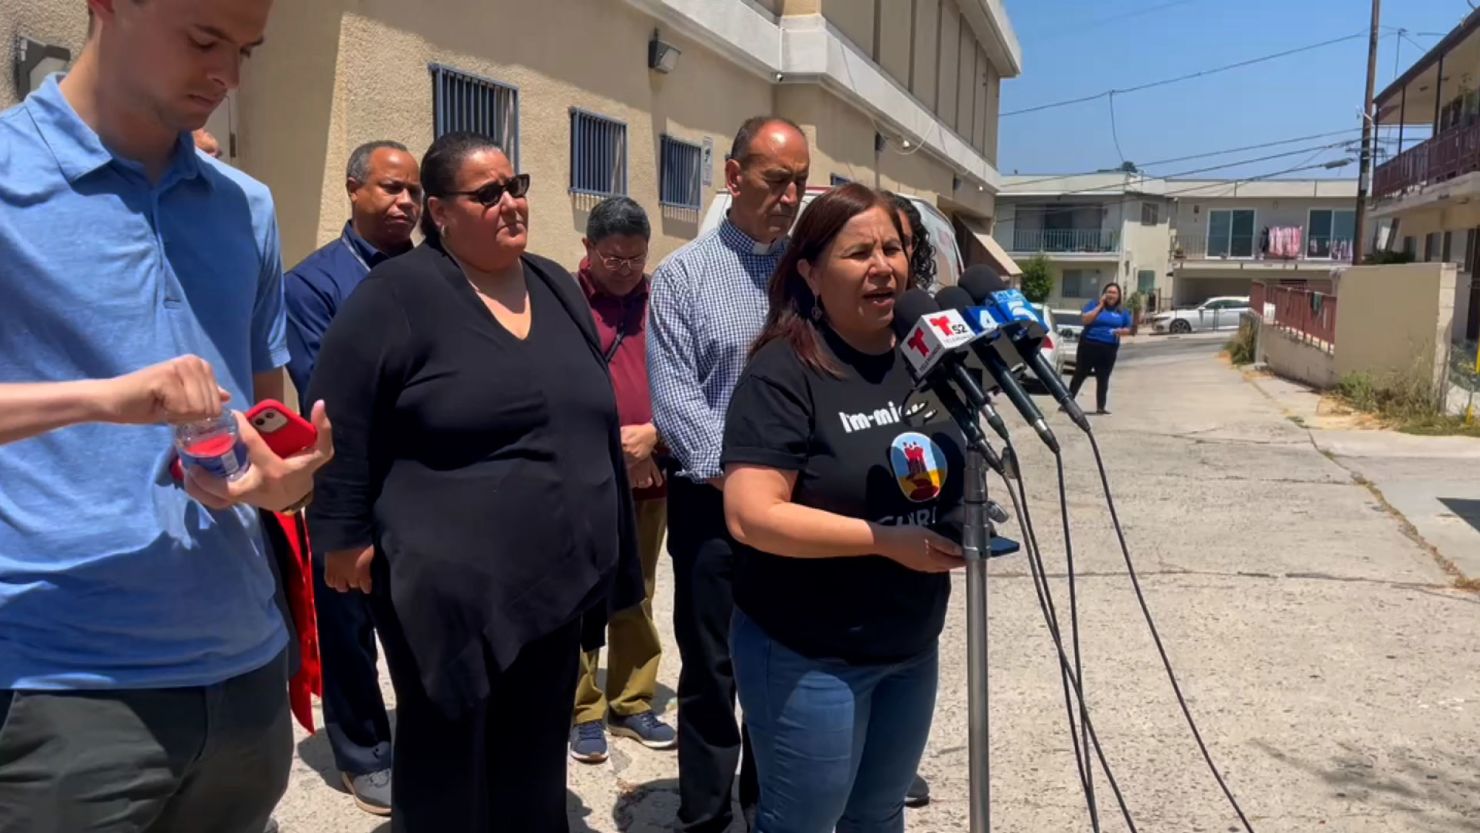 Angelica Salas, executive director for the Coalition for Humane Immigrant Rights of Los Angeles, speaks at a news conference on July 1.